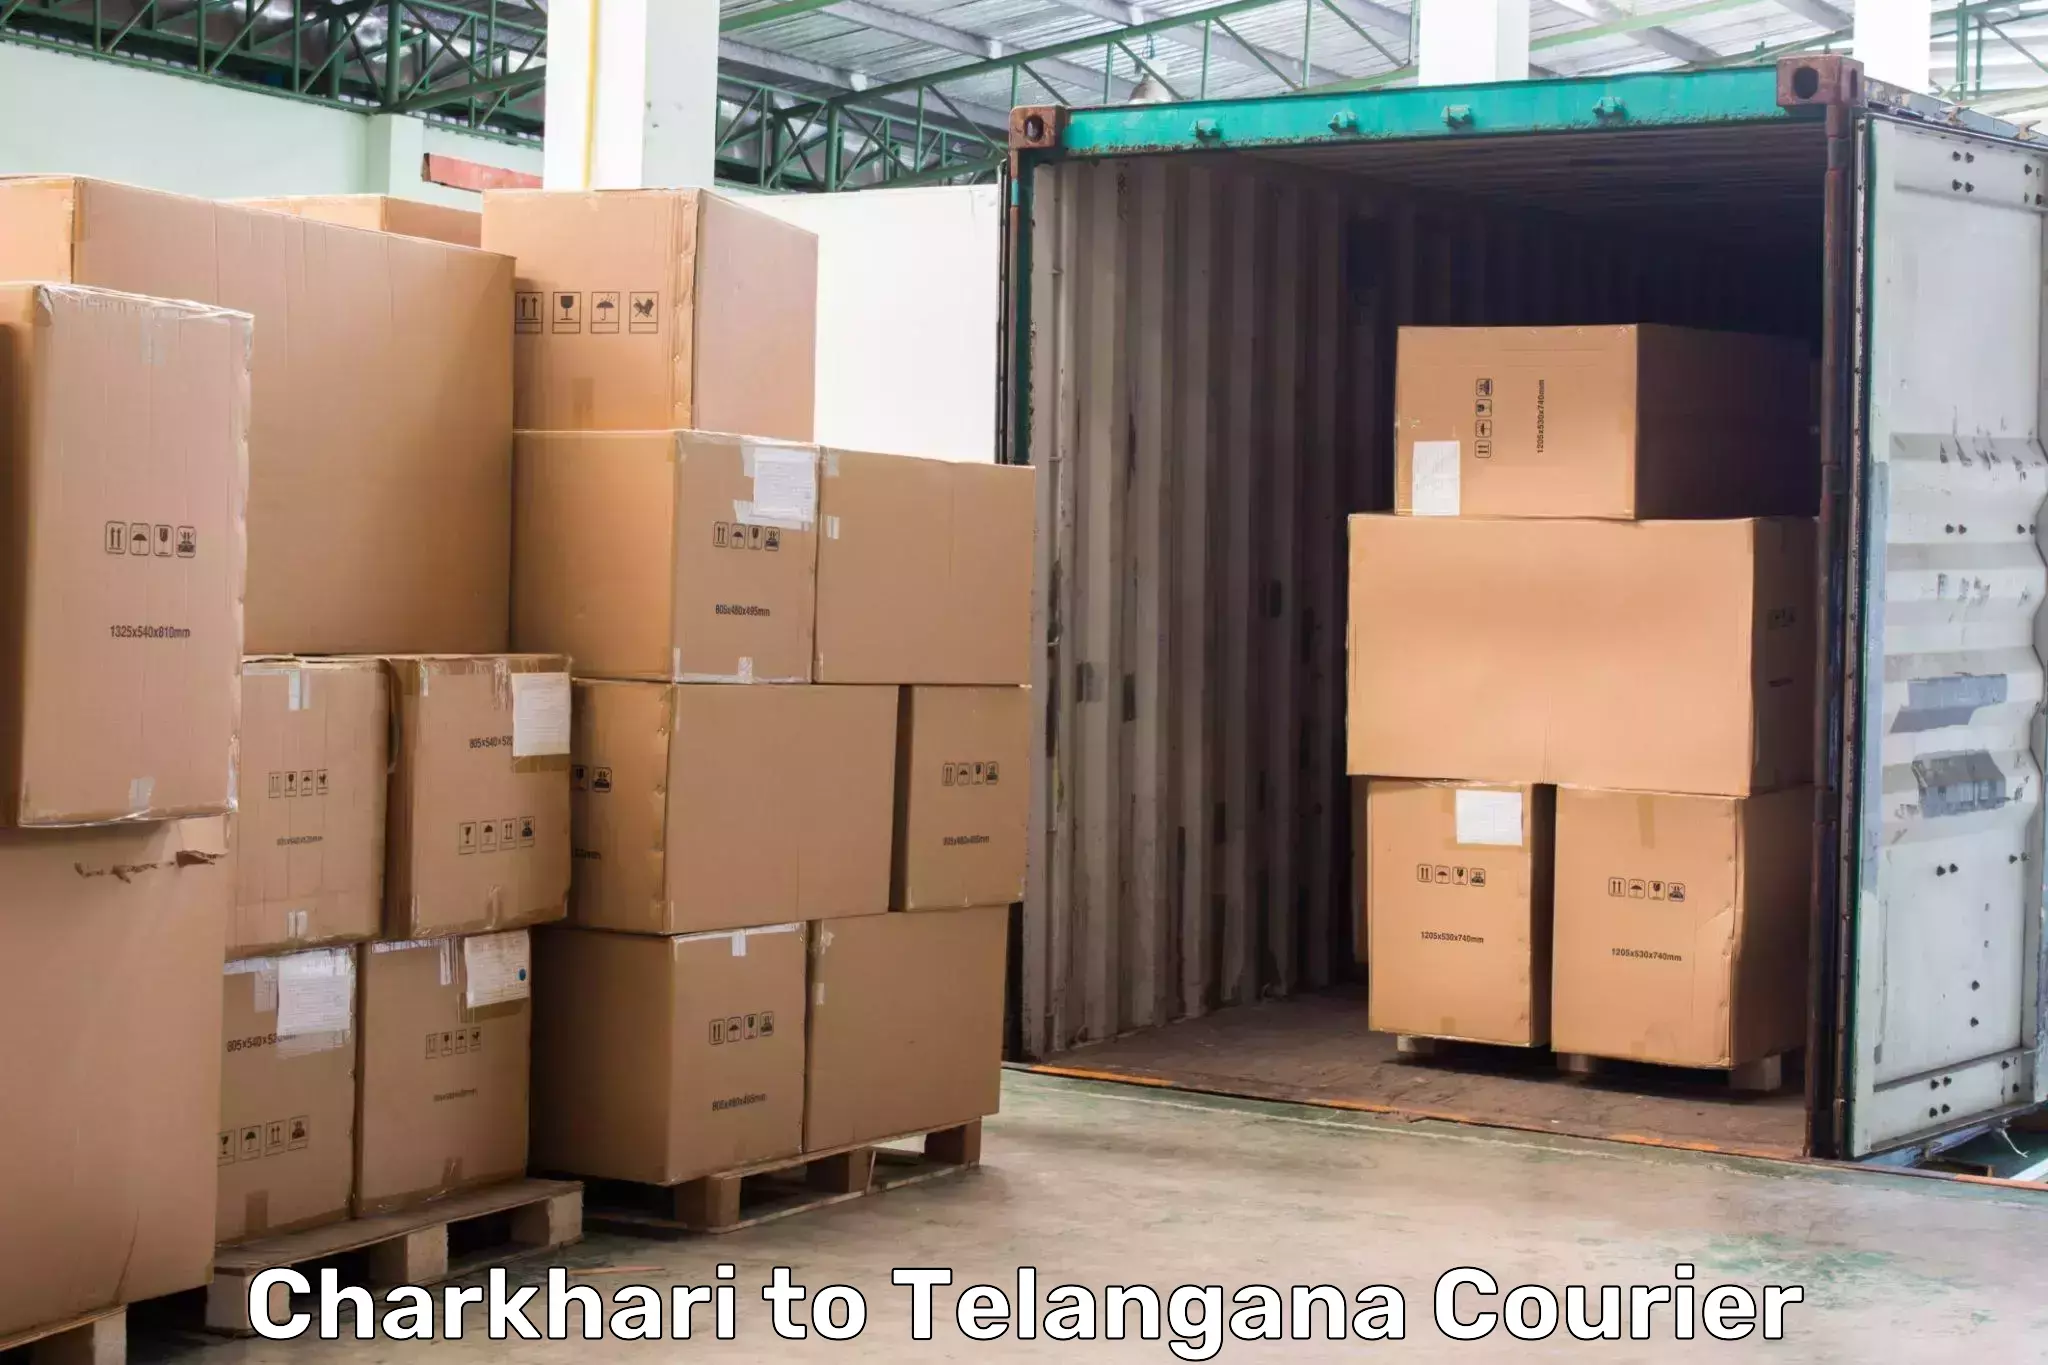 International courier networks Charkhari to Trimulgherry